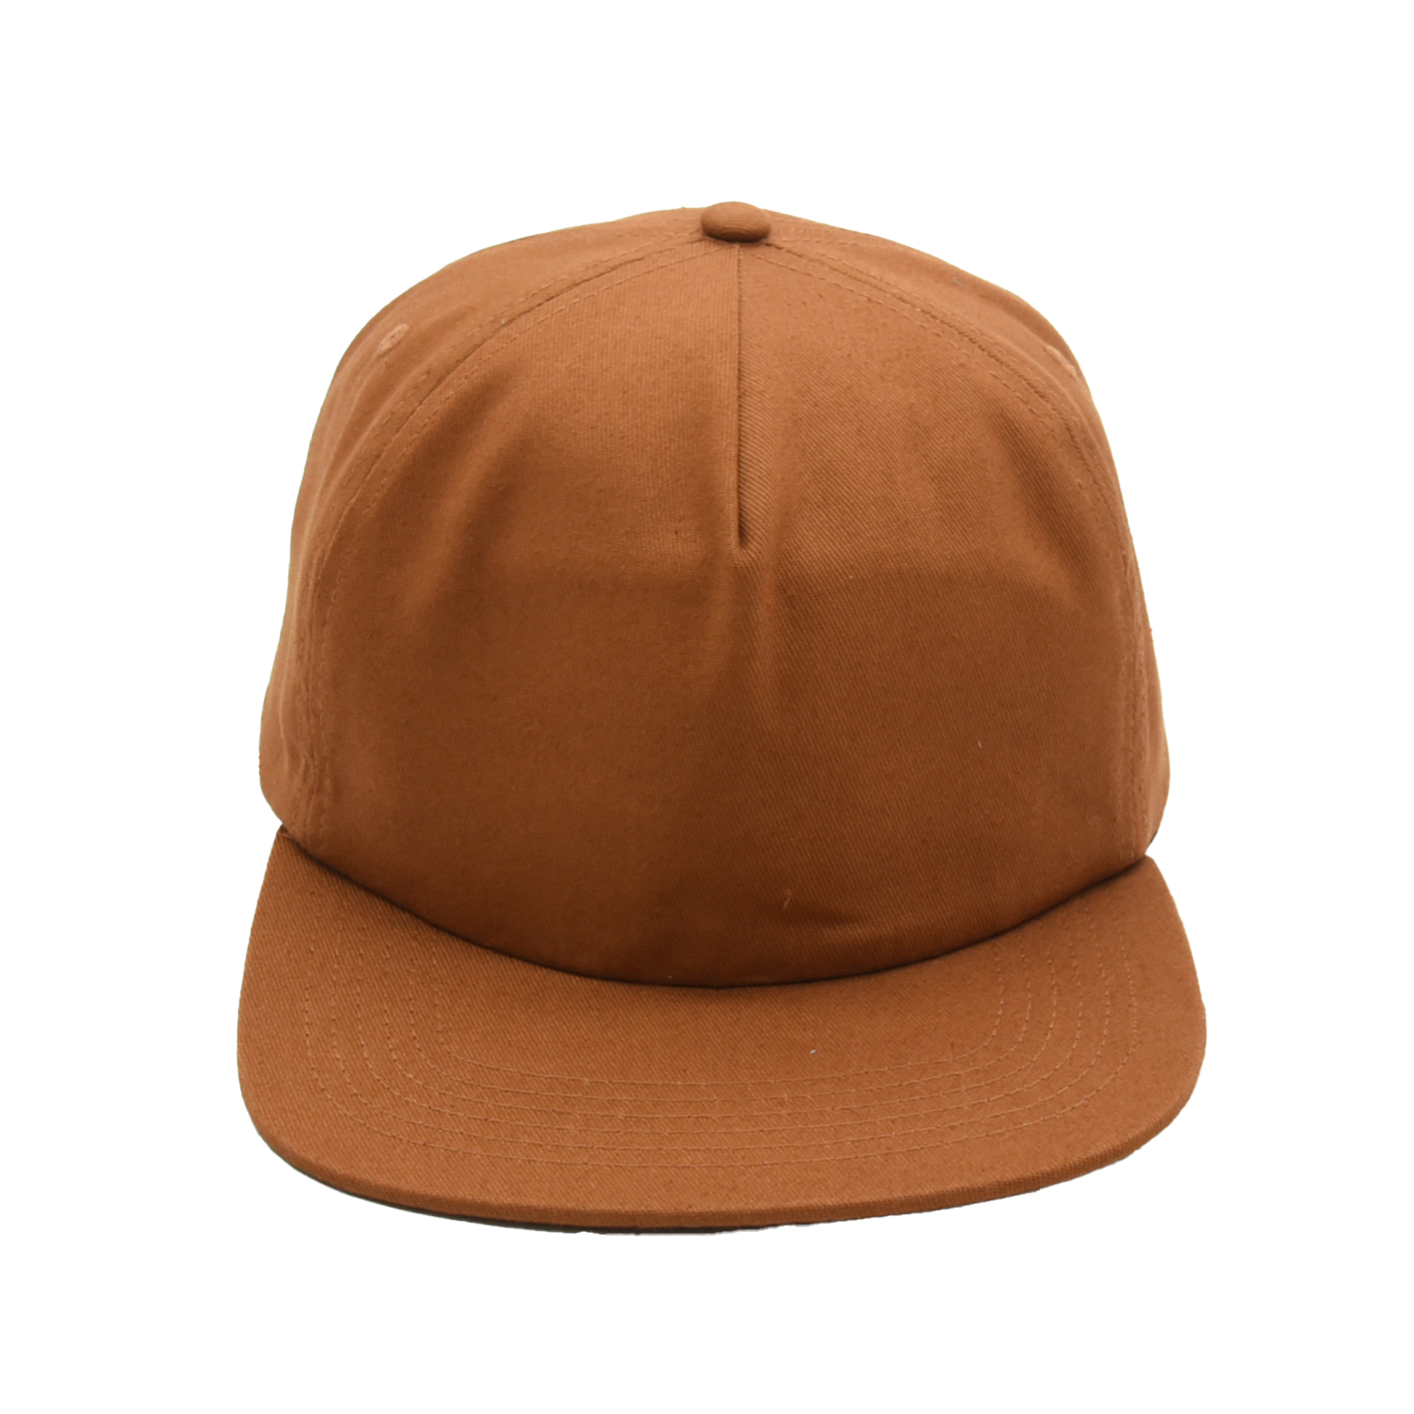 Sienna 5-Panel Cotton Snapback Hat Blank - Front view only